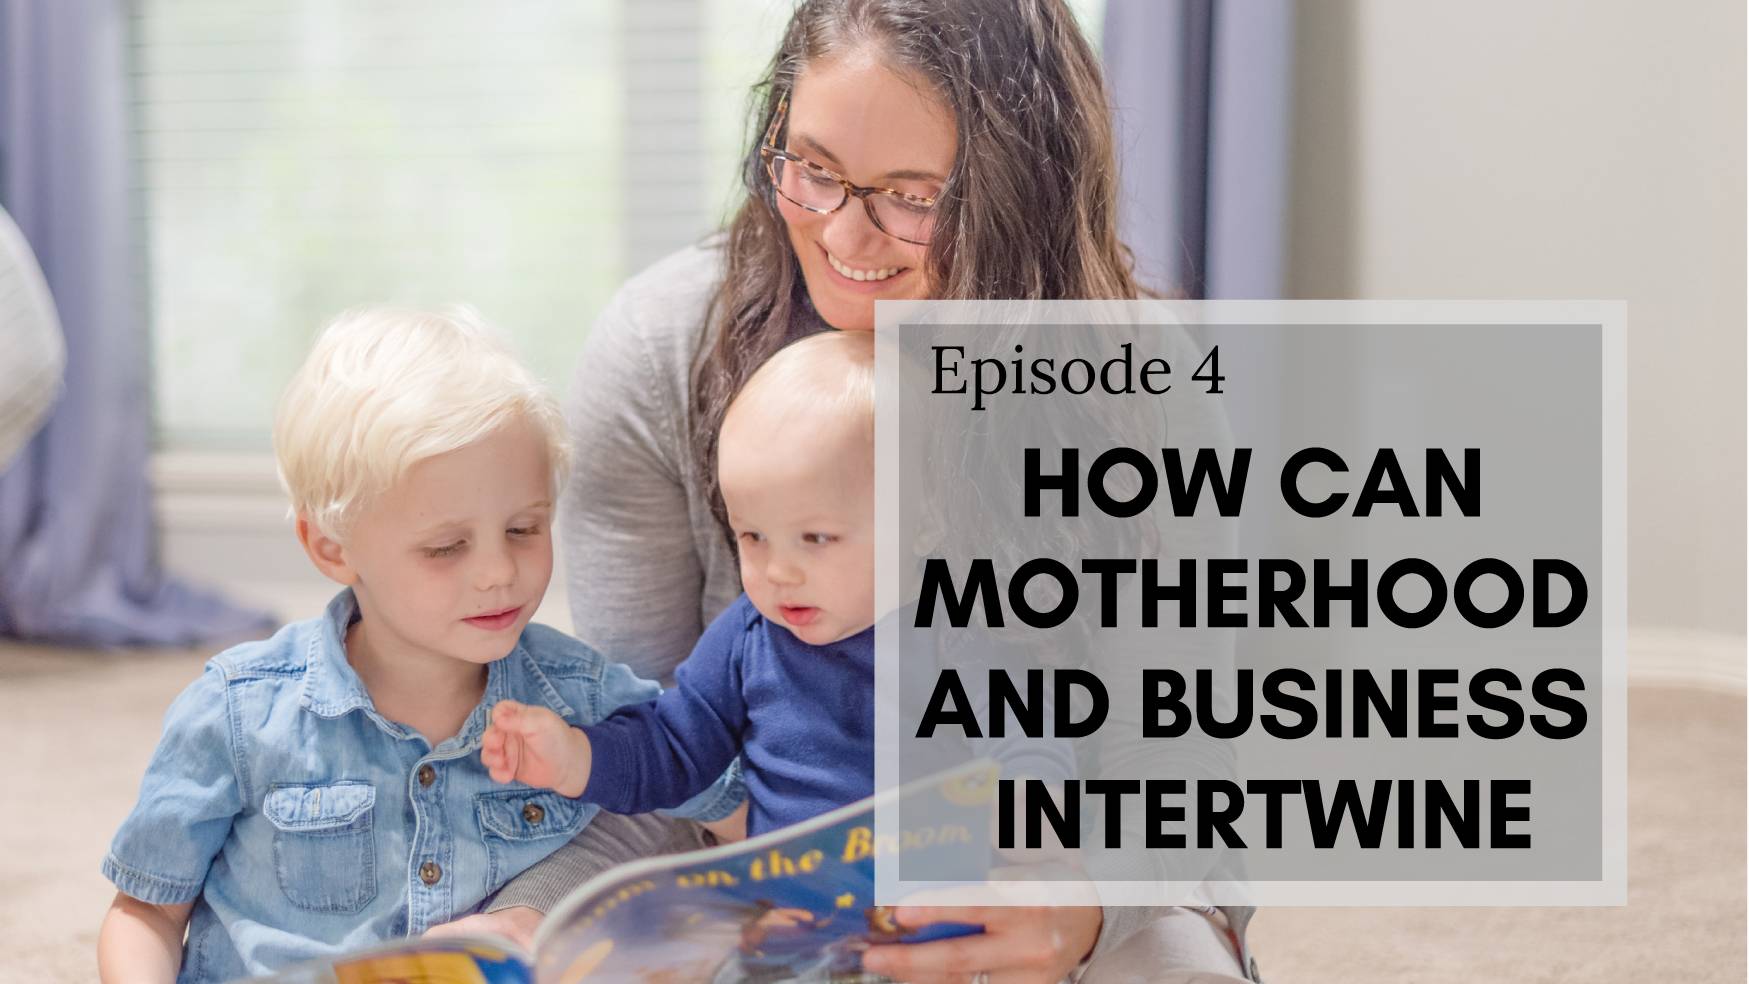 HOW CAN MOTHERHOOD AND BUSINESS INTERTWINE